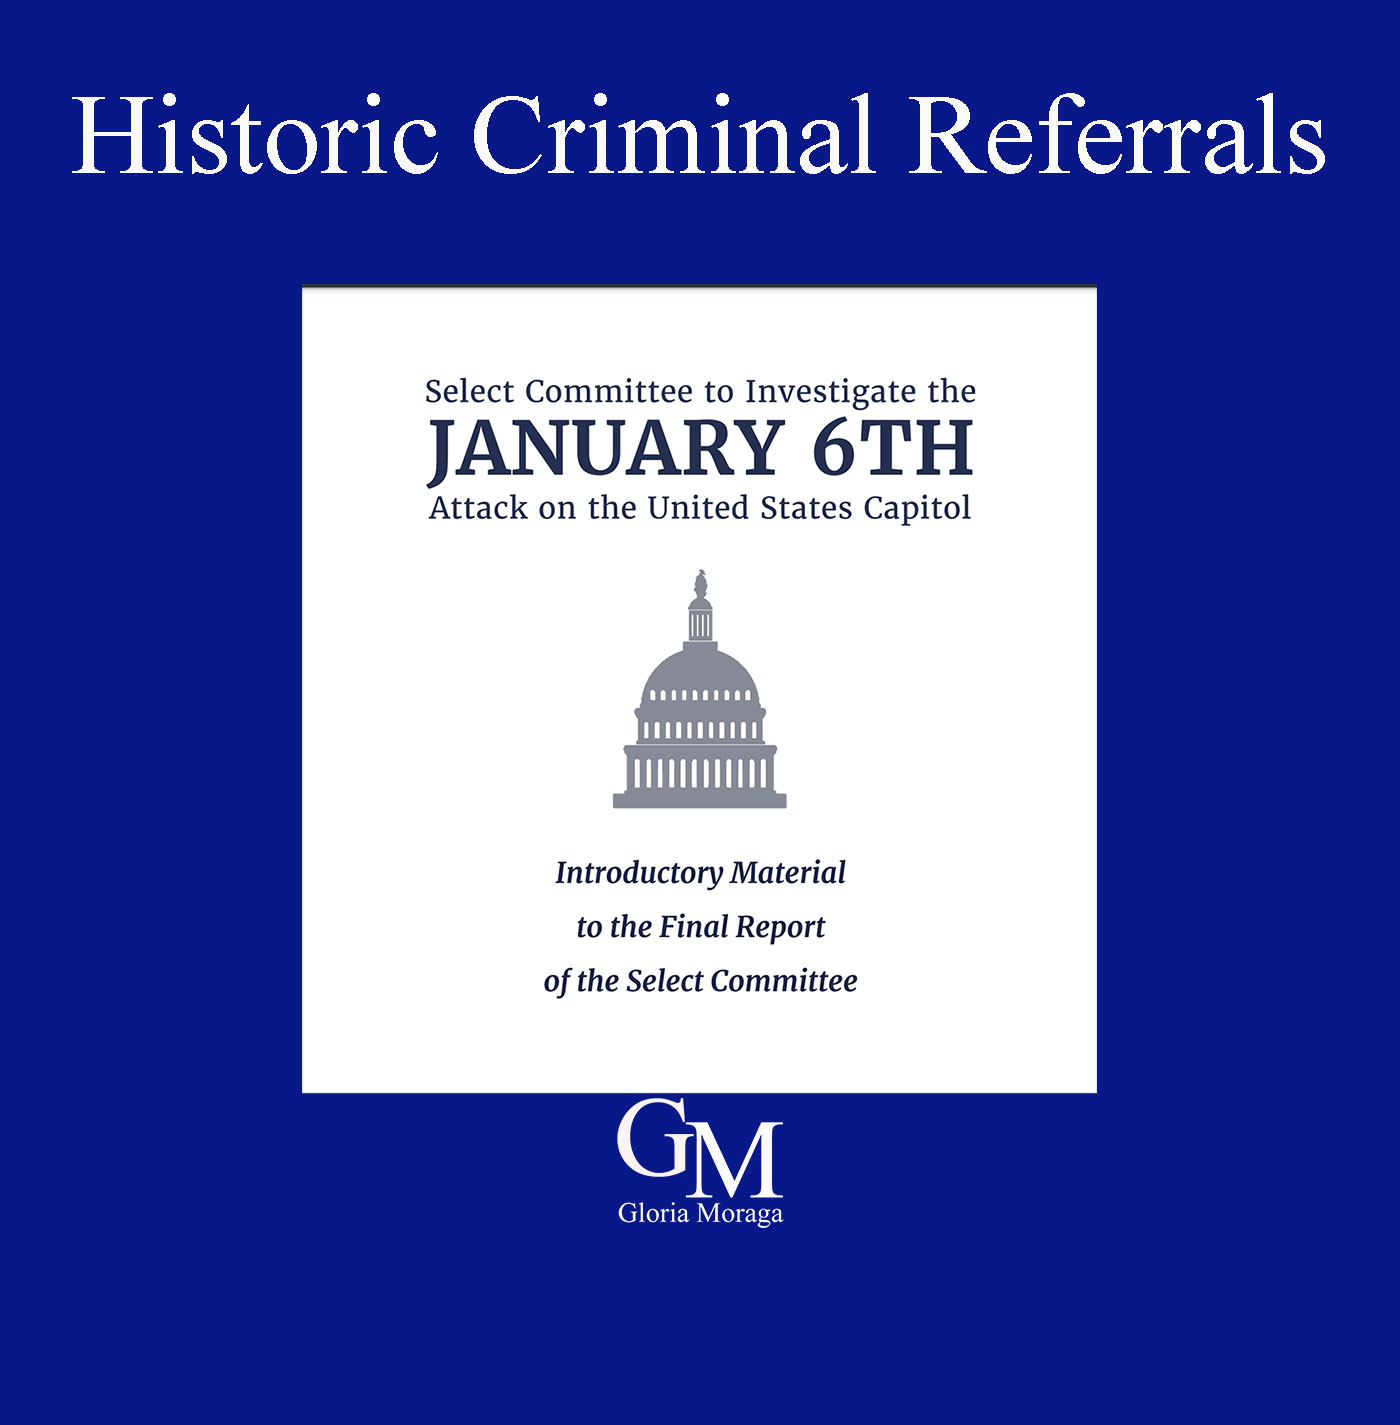 Historic Criminal Referrals. The cover page of the Select Committee report on the January 6th attack on the United States Capitol. White report on a blue background.